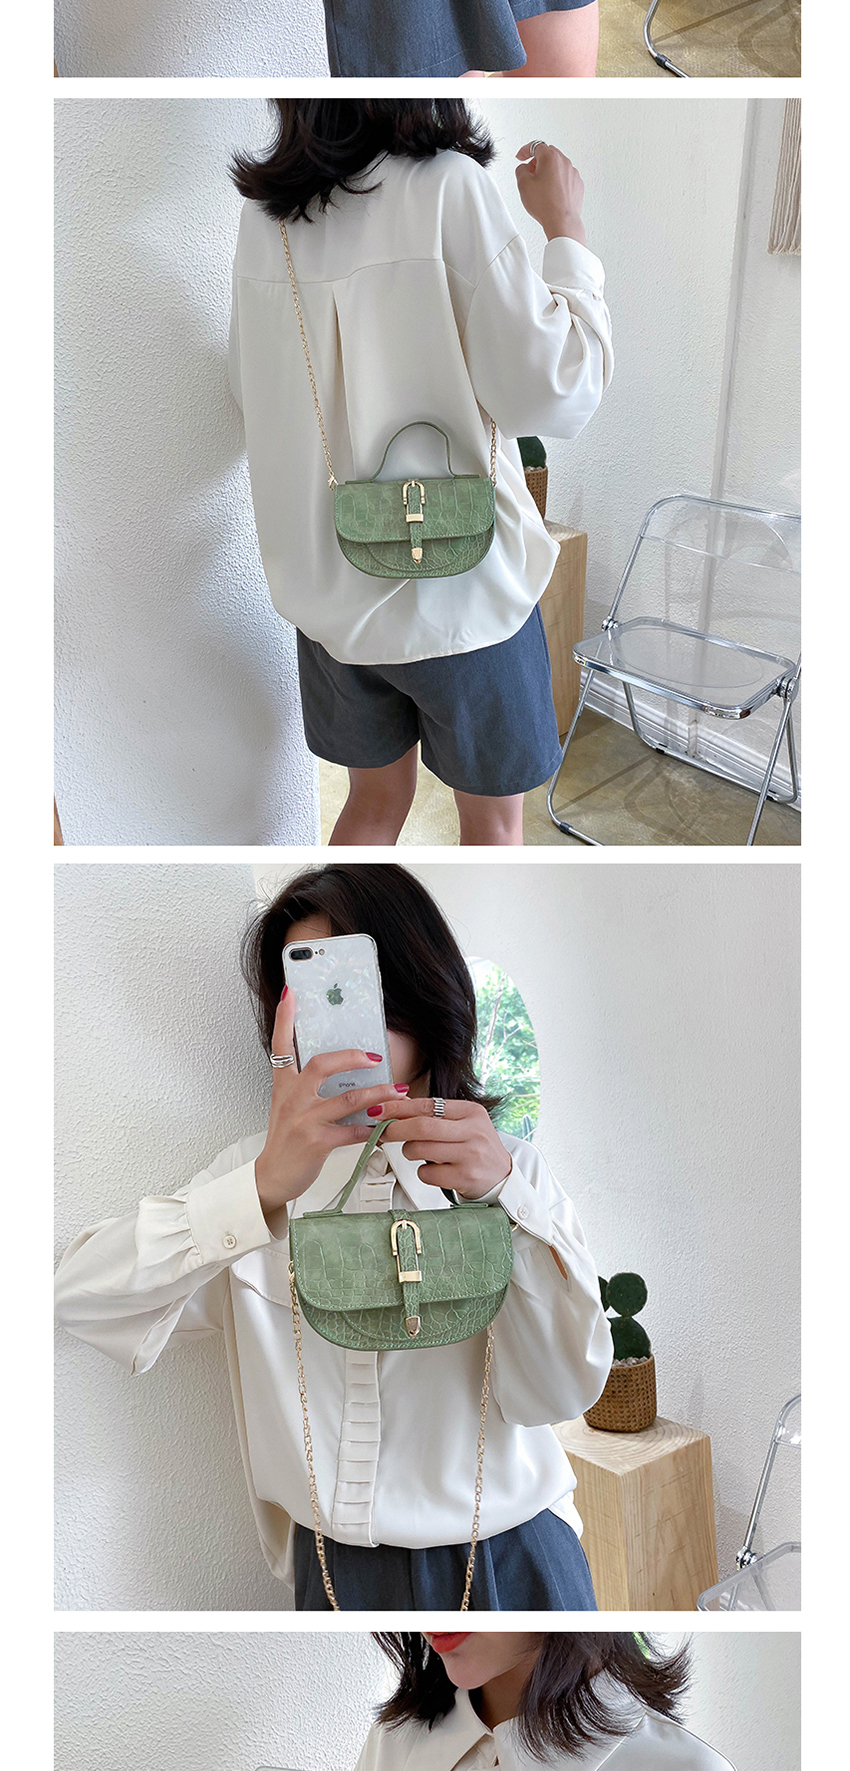 Fashion Green Chain Shoulder Bag With Crocodile Pattern Buckle,Shoulder bags